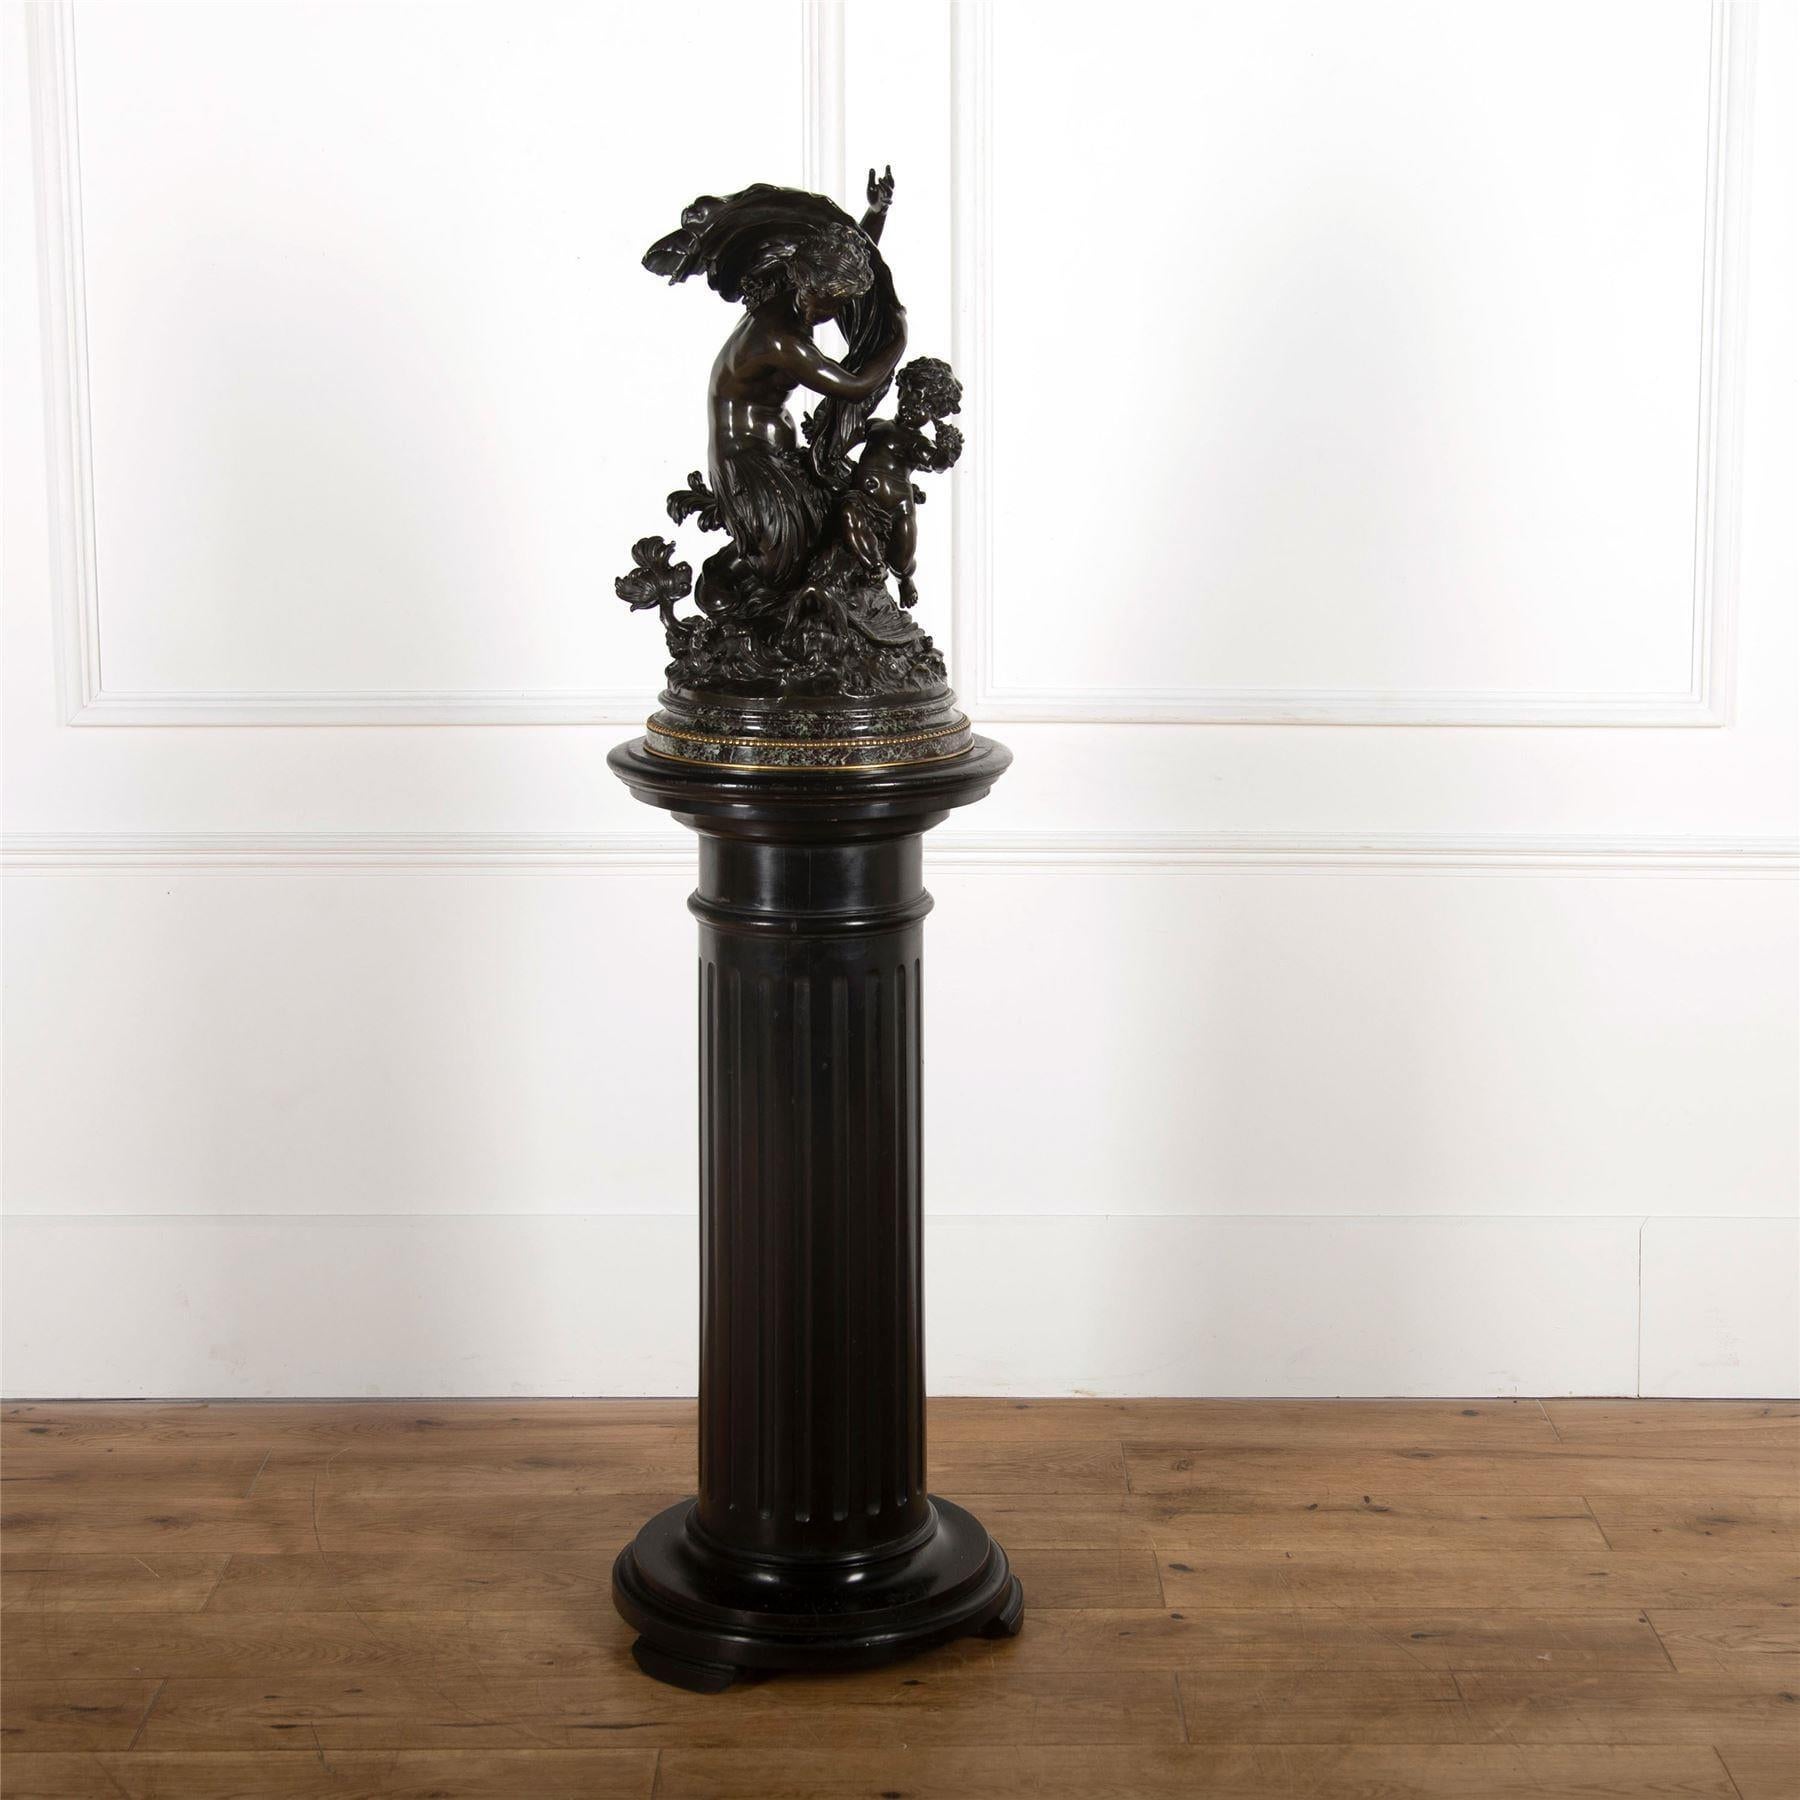 19th century Baroque style bronze group, depicting two putti amongst nature.

The appearance of putti in sculpture symbolized fertility and abundance. 

The group is on a marble base, supported by a significant column. Excellent condition and a